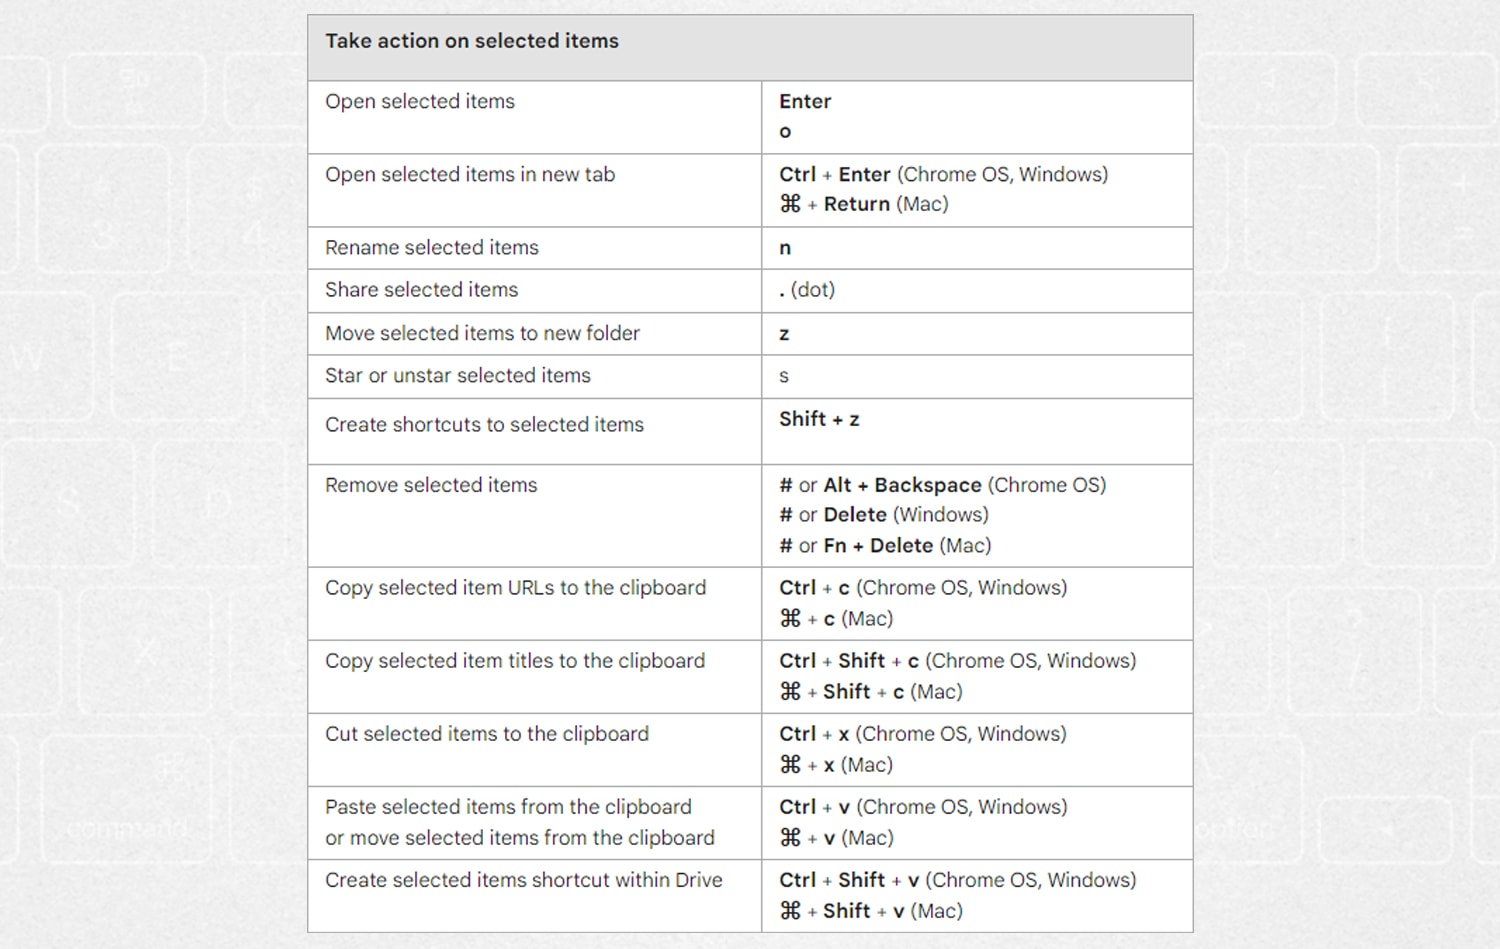 Google Drive Hacks: Keyboard Shortcuts Every User Should Know